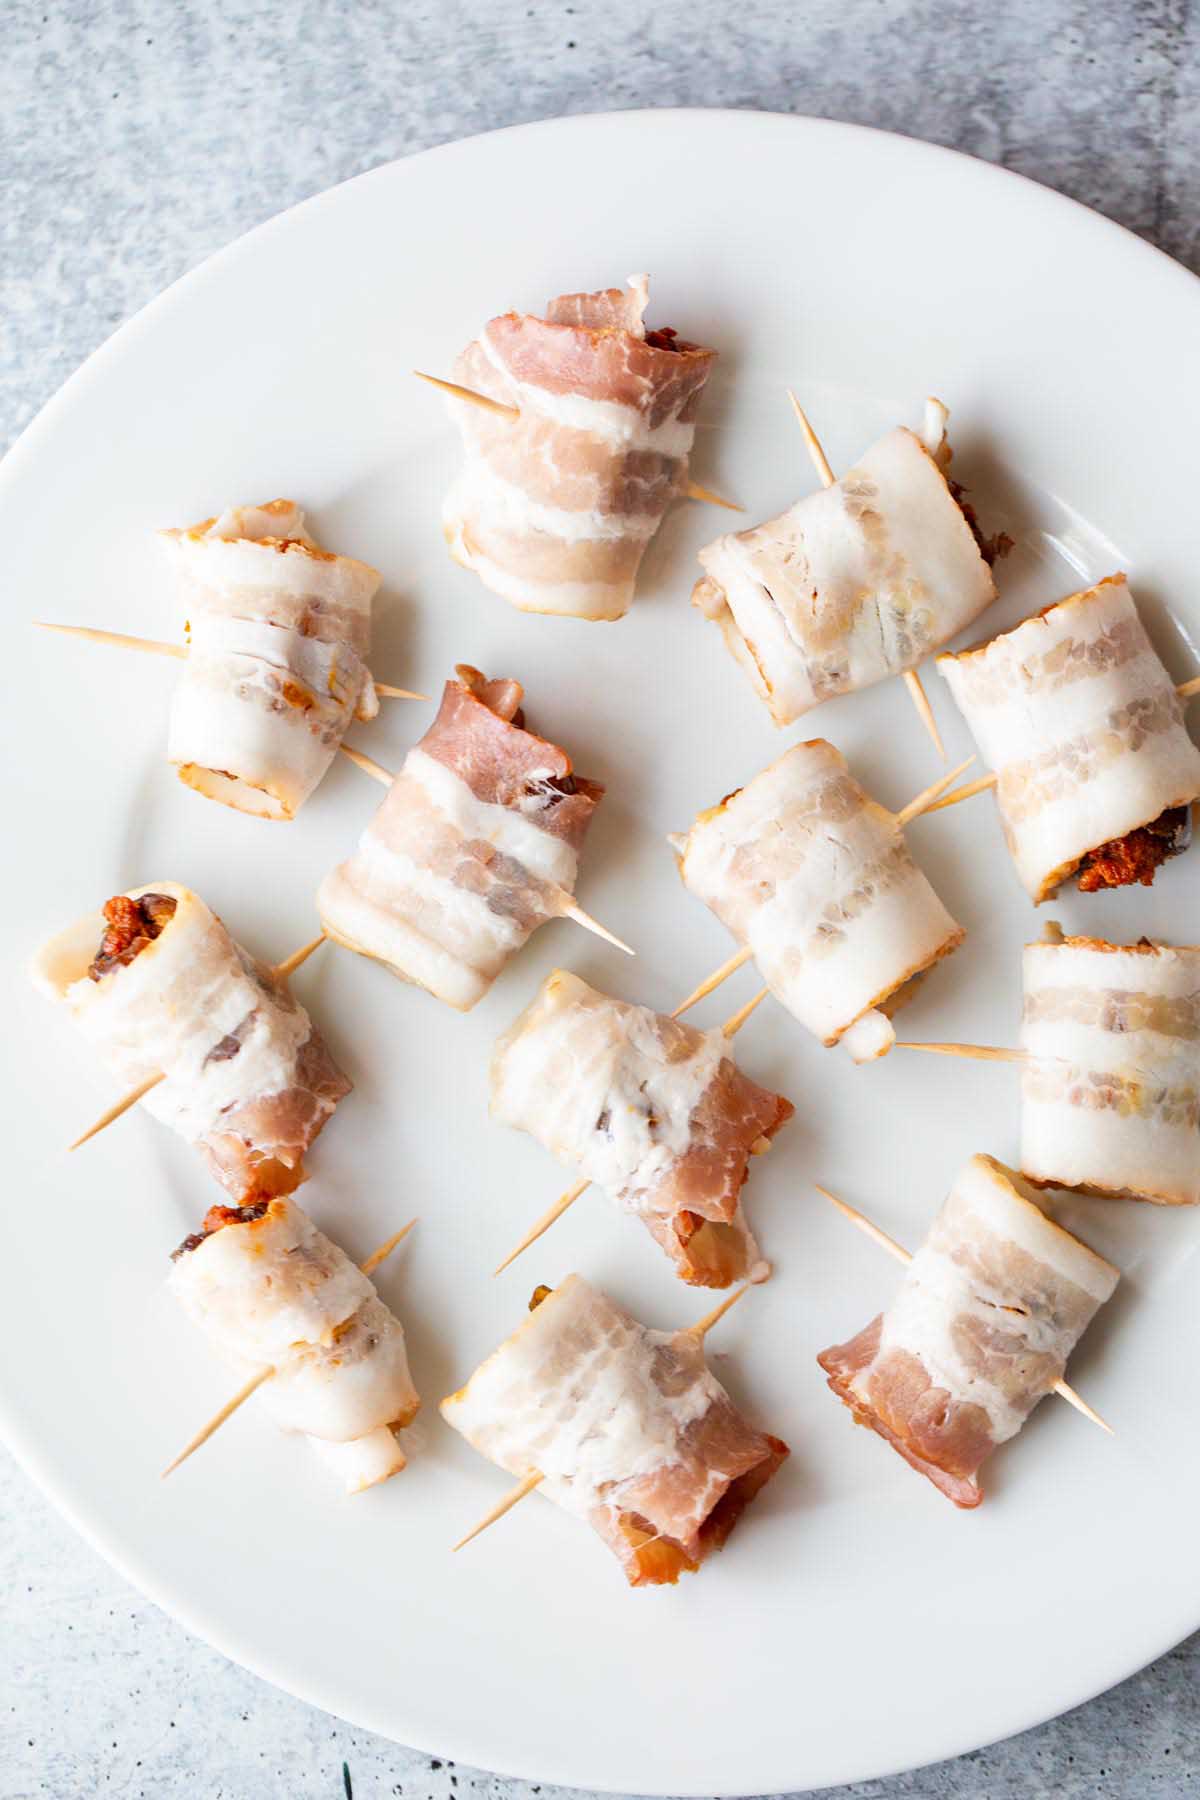 Uncooked bacon wrapped dates on a plate.